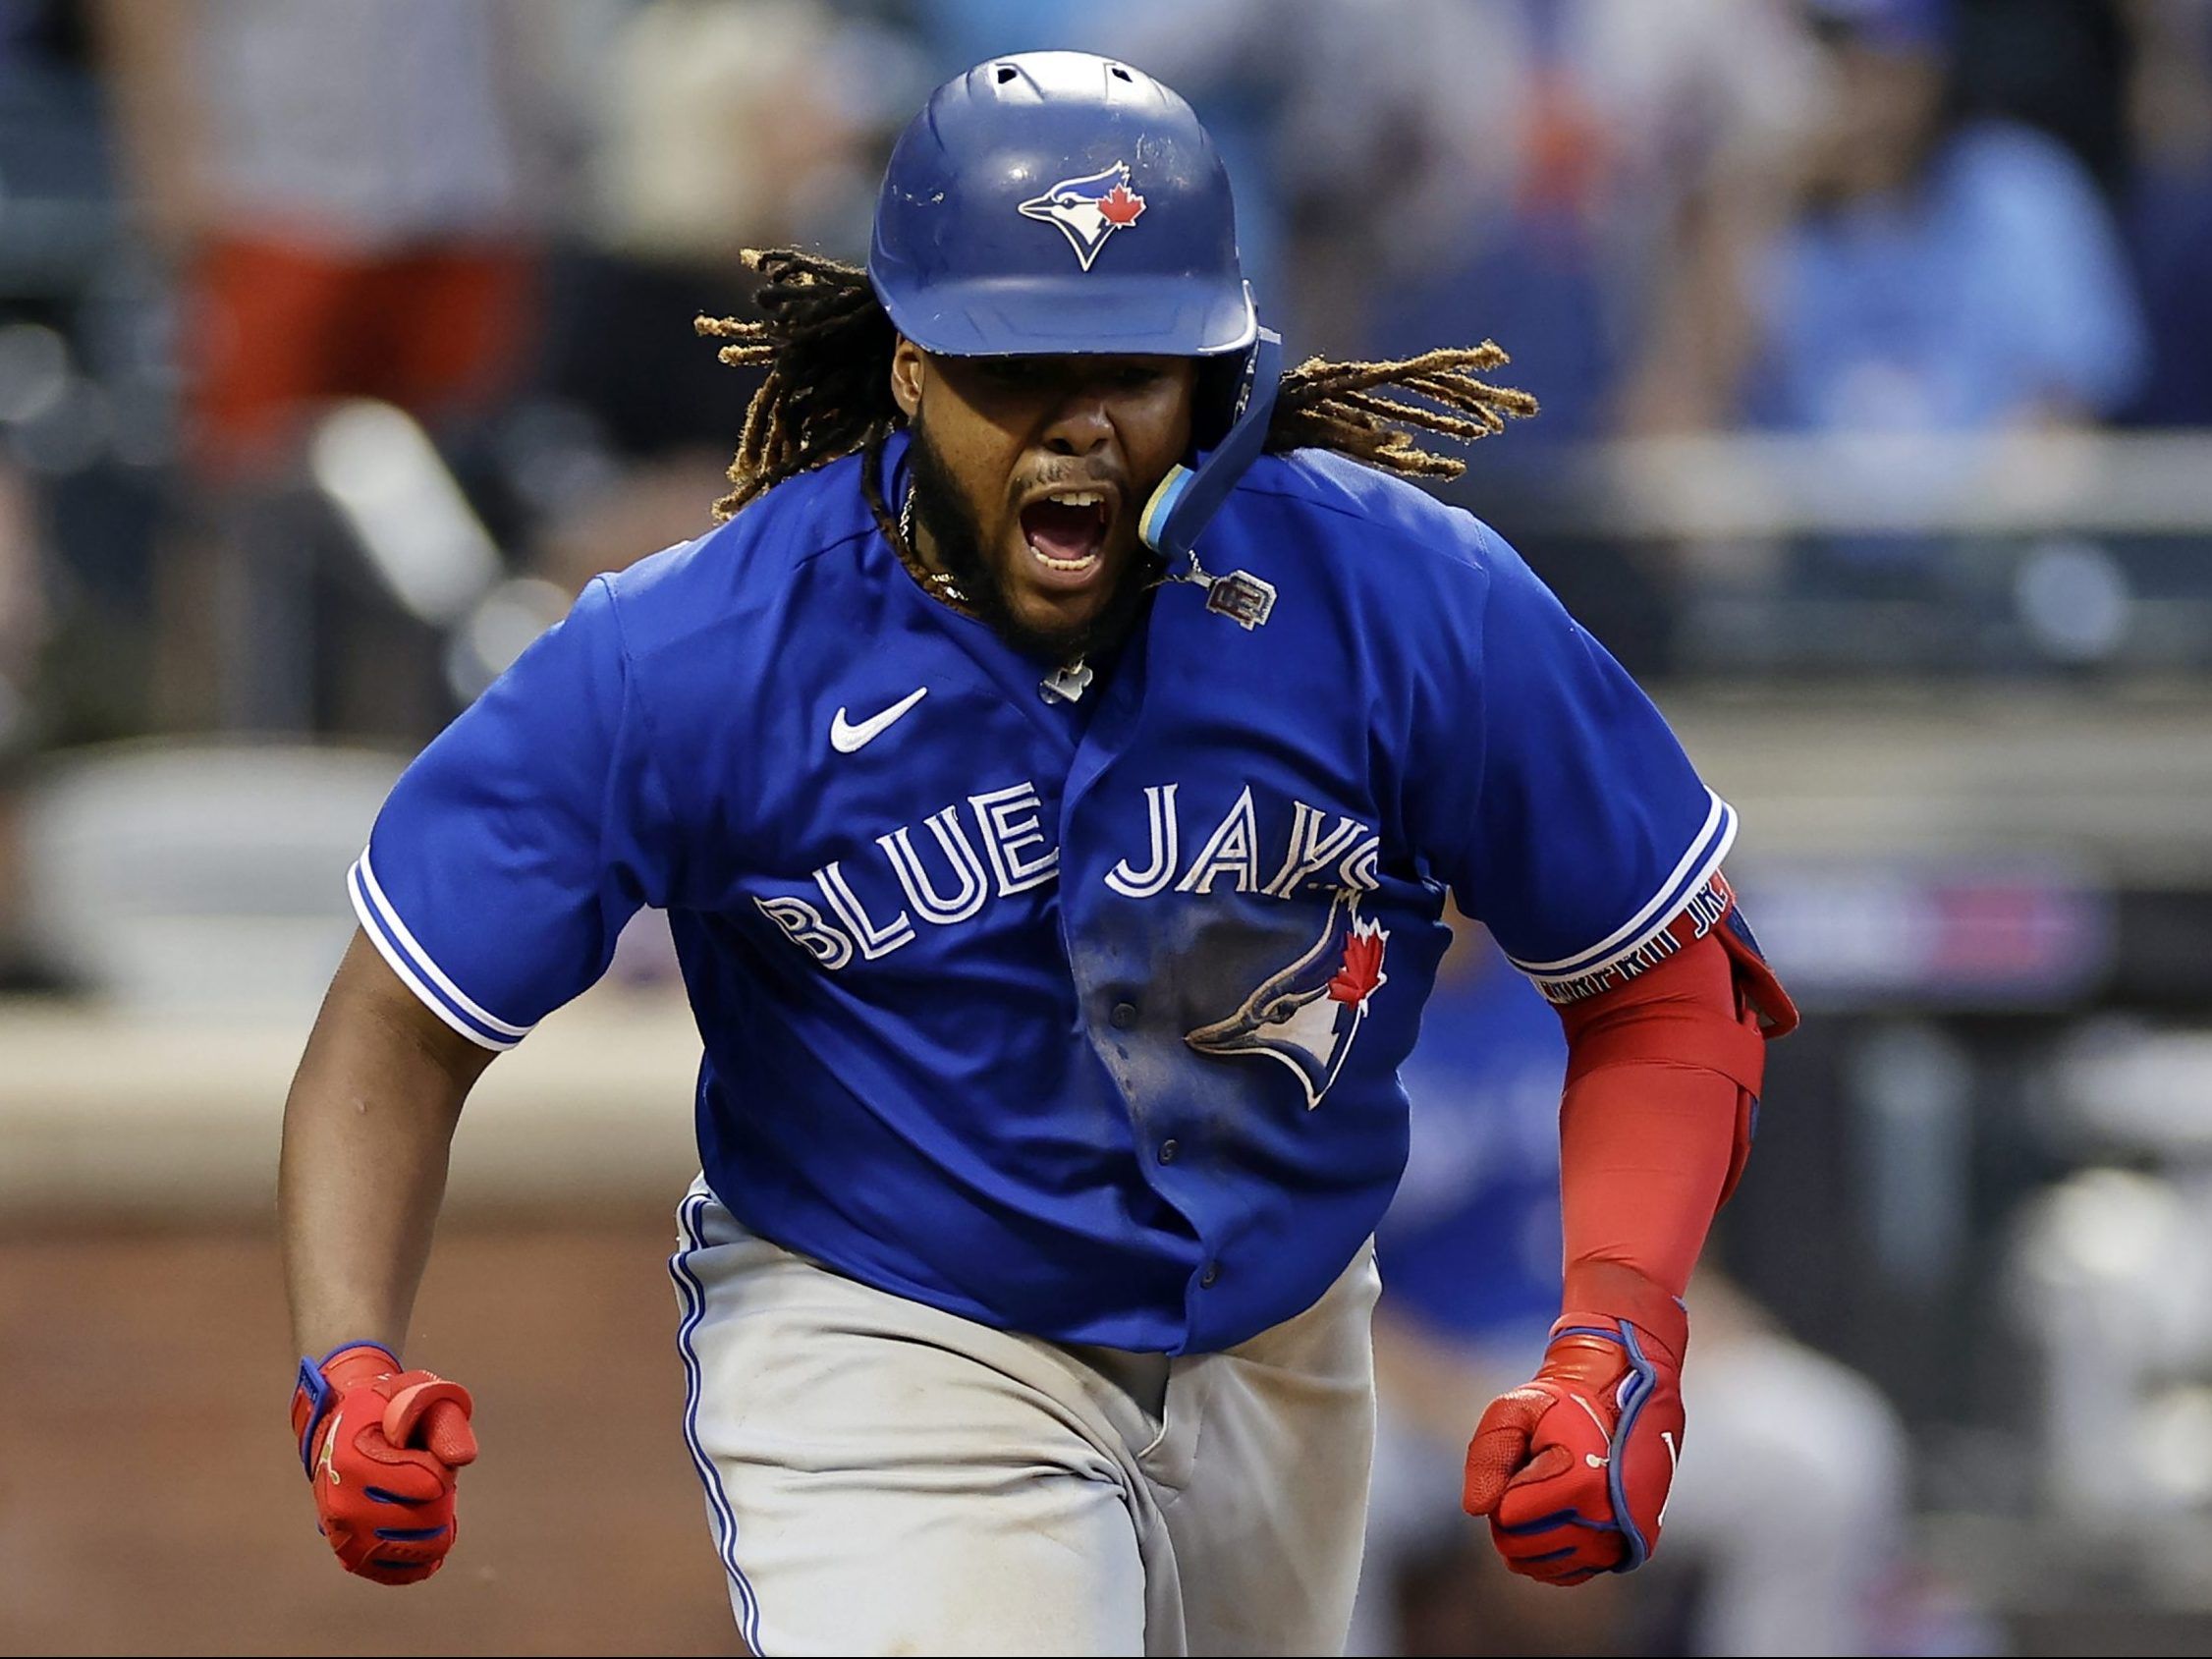 Without Guerrero Jr., Blue Jays see winning streak snapped